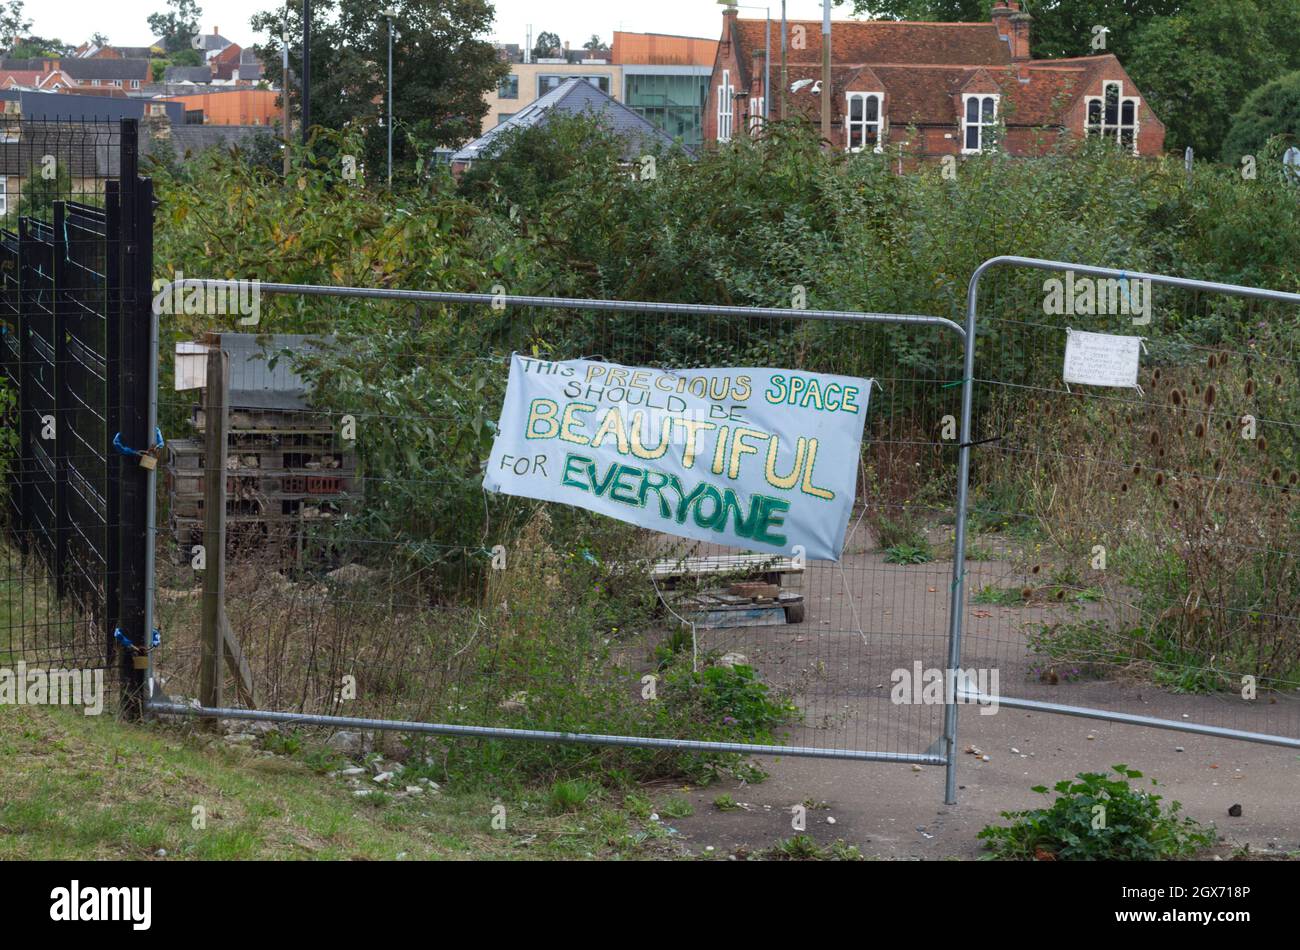 St Botolph's, Colchester, site of potential development into student accommodation. A banner has been hung on the fence in protest. Stock Photo